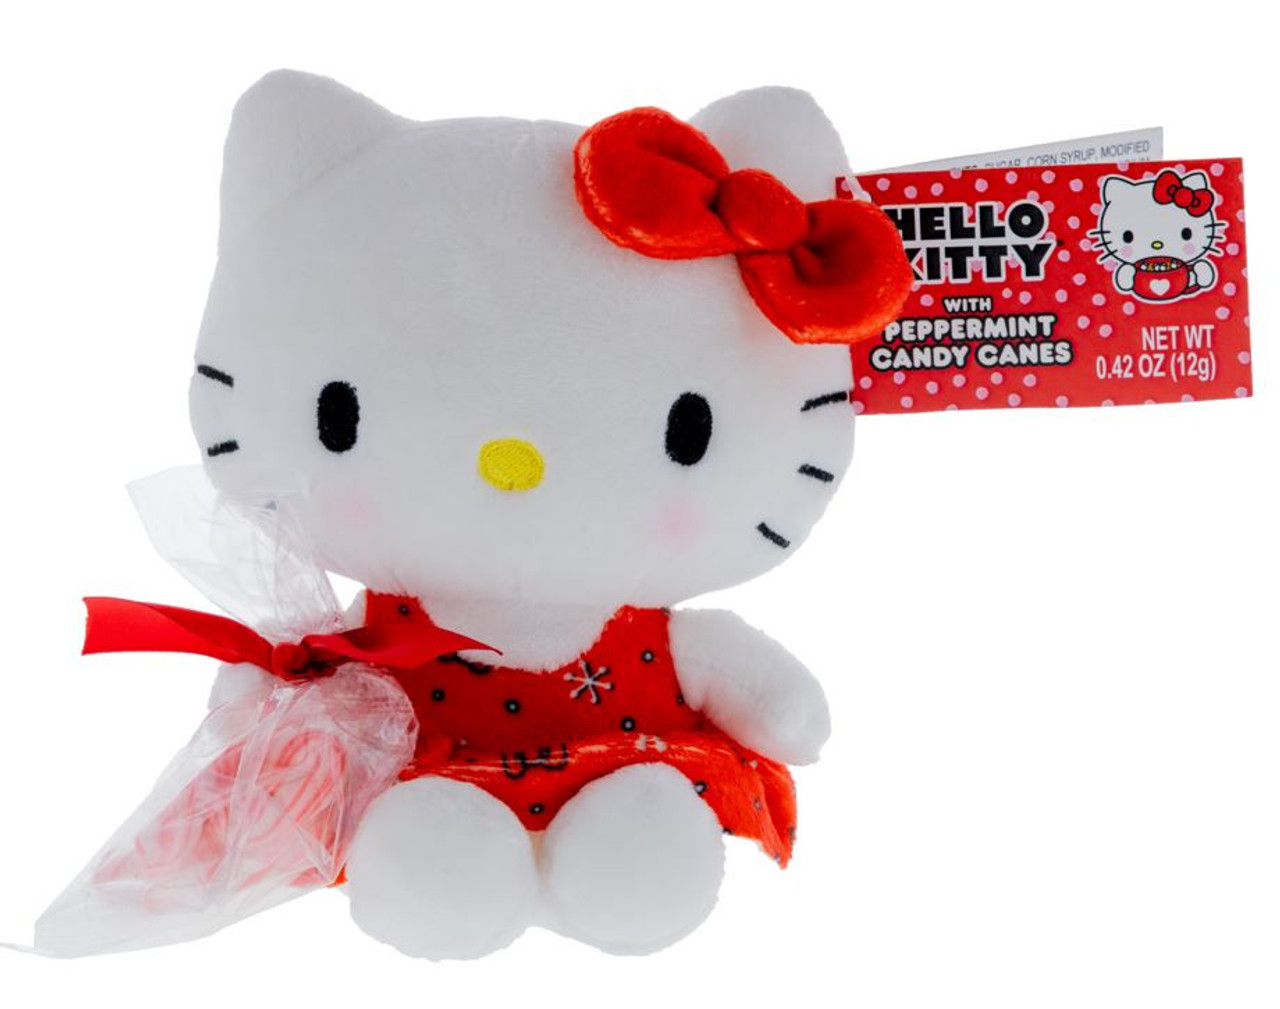 https://cdn11.bigcommerce.com/s-s400f38mcs/images/stencil/1280x1280/products/893/3395/Hello_Kitty_Plush_with_candy_canes__89065.1666625052.1280.1280__54937.1673291873.jpg?c=1